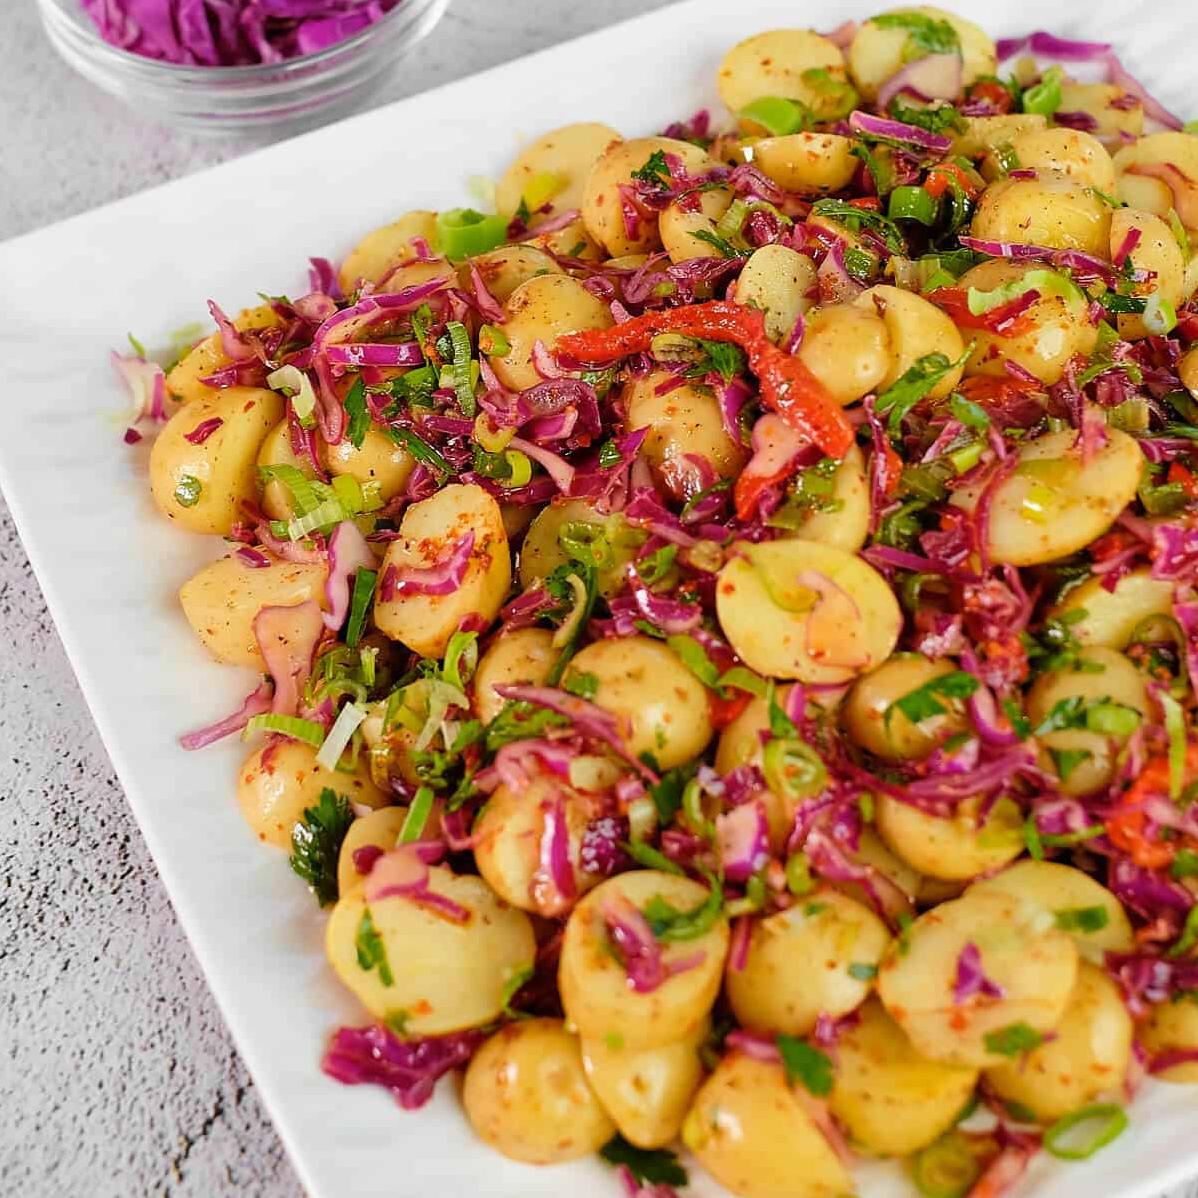  Craving a light, nutritious, tangy and creamy salad? This Turkish potato salad is just the answer.